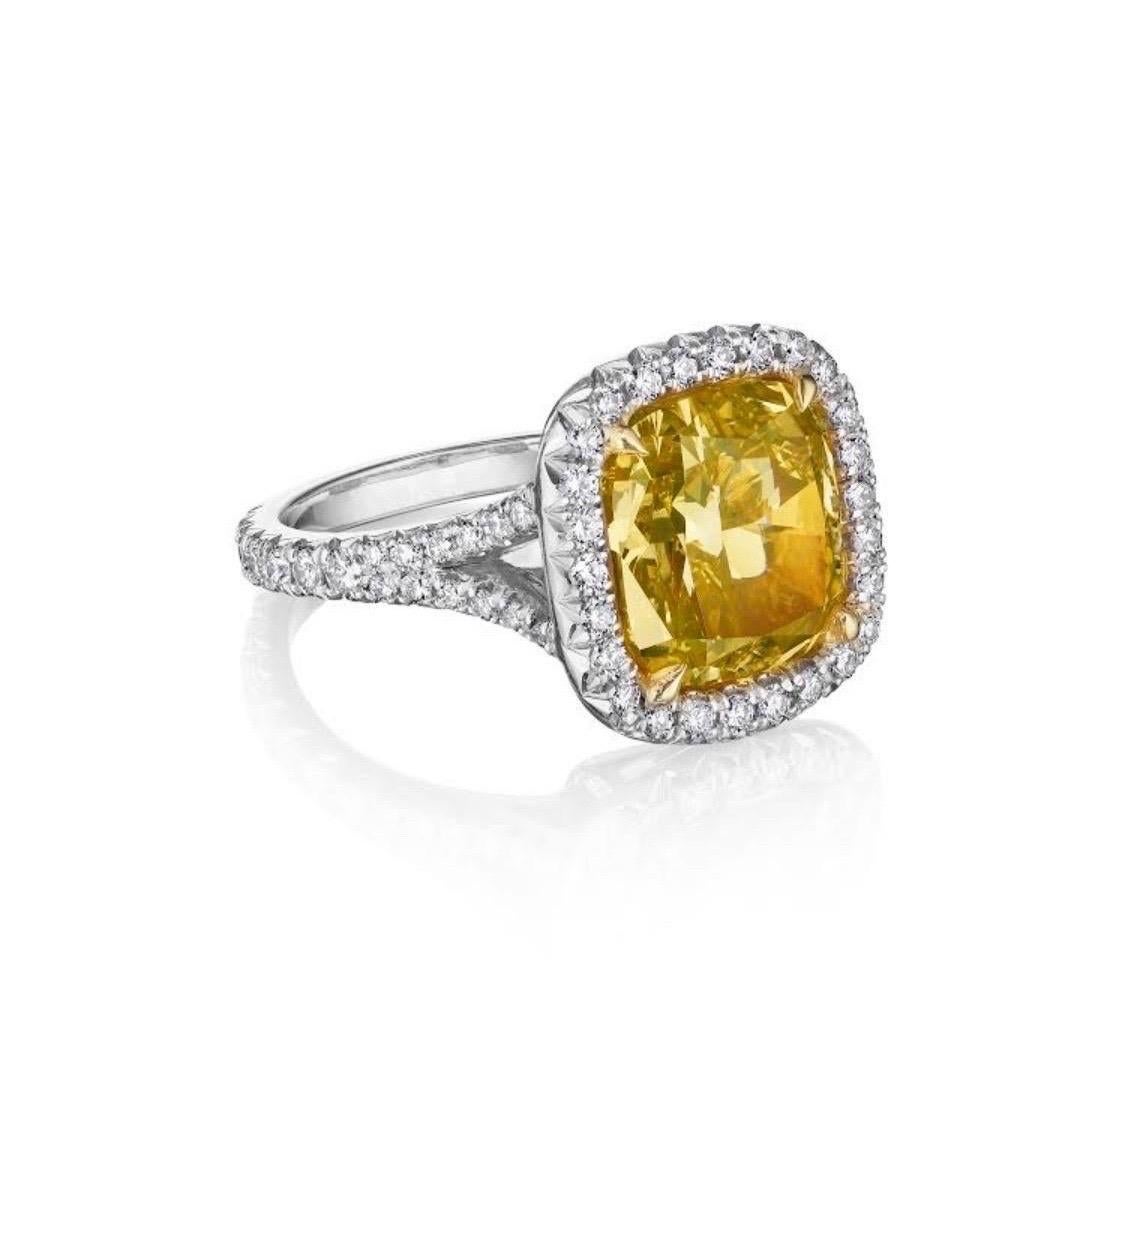 This incredible engagement ring features a GIA graded 5.05 carat fancy vivid yellow cushion cut diamond with a VS2 clarity.
This beautiful diamond has incredible saturation of color and ilivley scintillation.
masterfully Set in a halo of white round